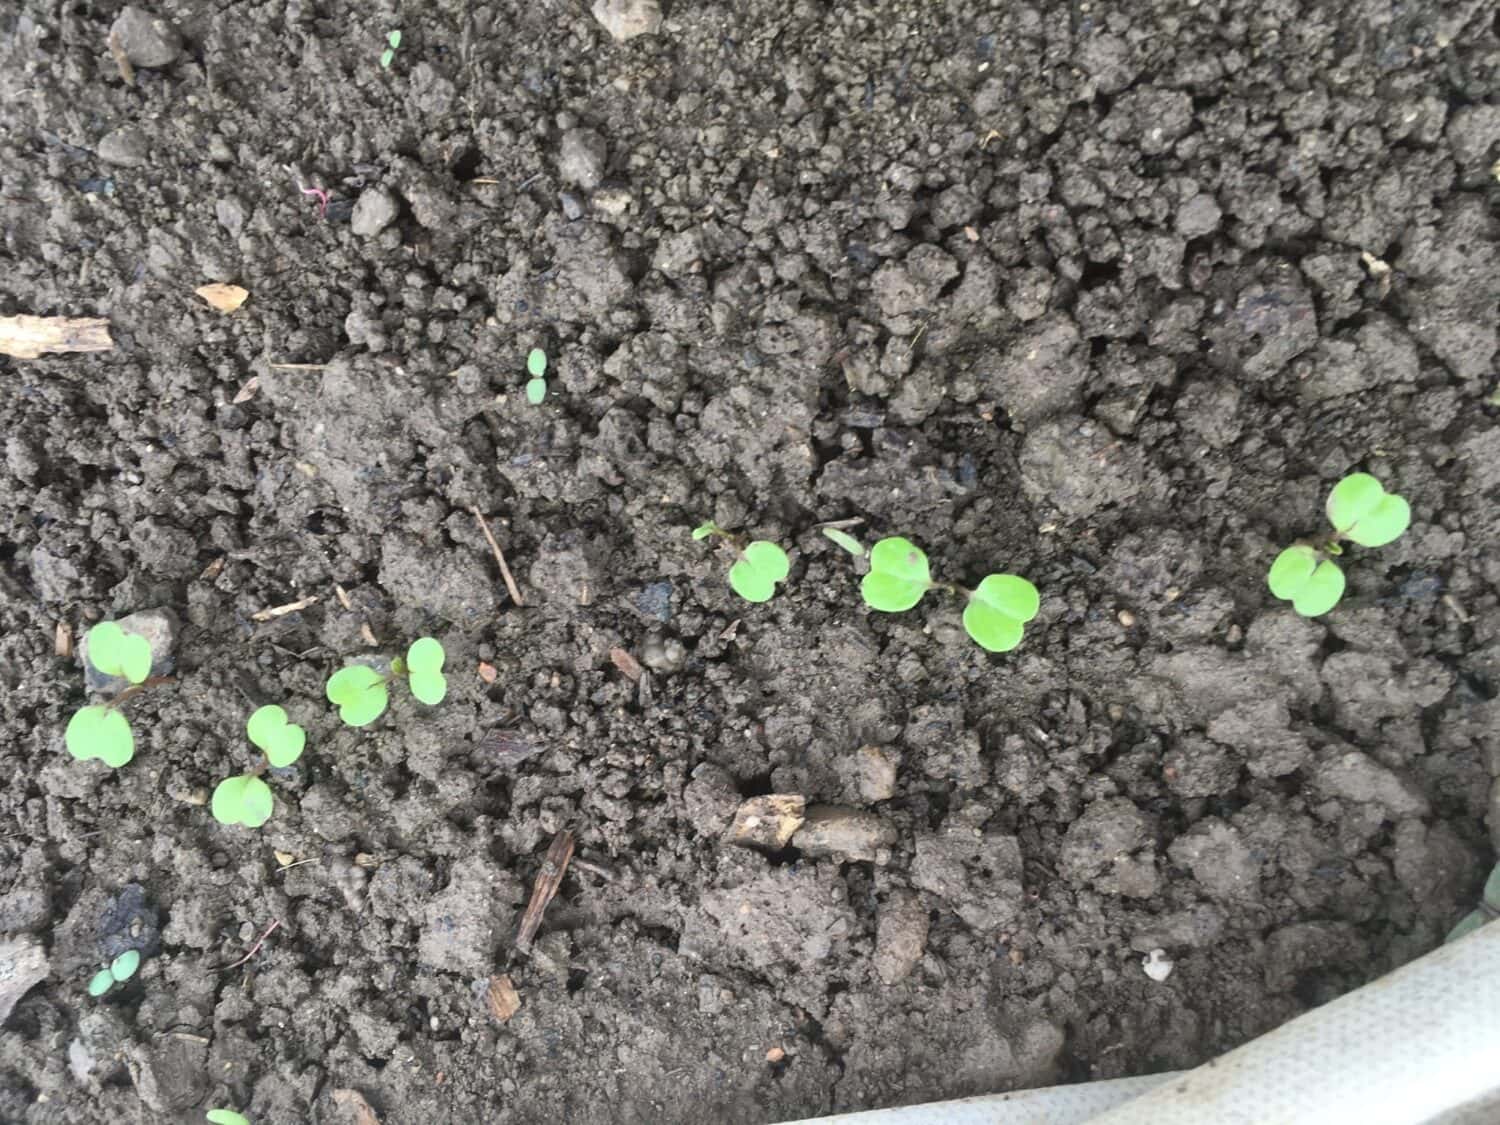 Seedlings in the mud - April Showers Upon Showers